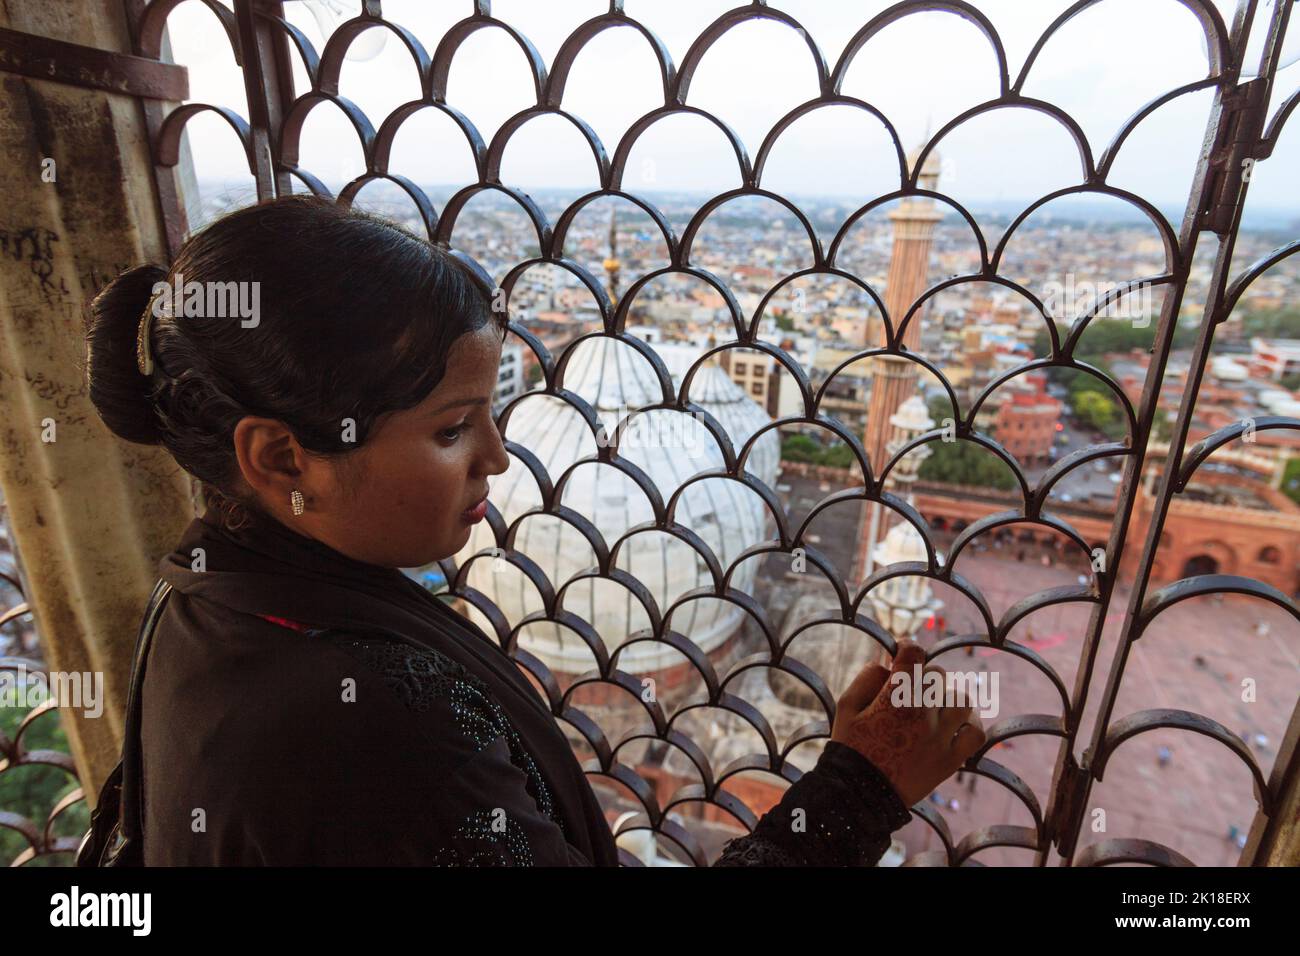 Delhi, India : A woman looks at the view of Old Delhi and the Jamaa Masjid from one of the minarets of the mosque. Stock Photo